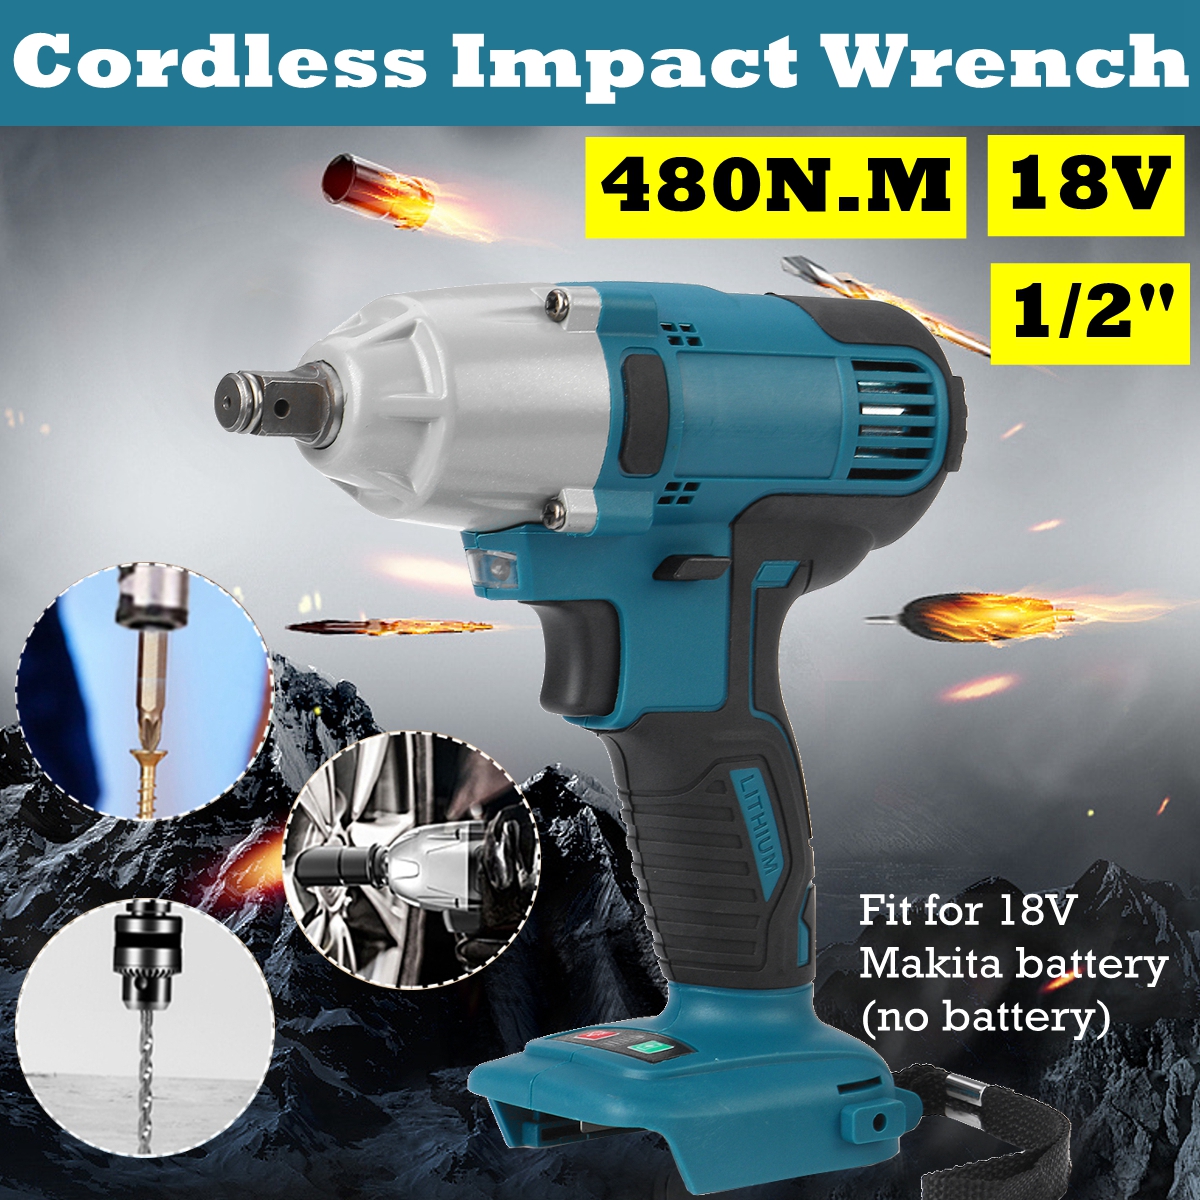 18V-480Nm-Li-Ion-Cordless-Impact-Wrench-Driver-12-Brushed-Electric-Wrench-Replacement-for-Makita-Bat-1658554-2